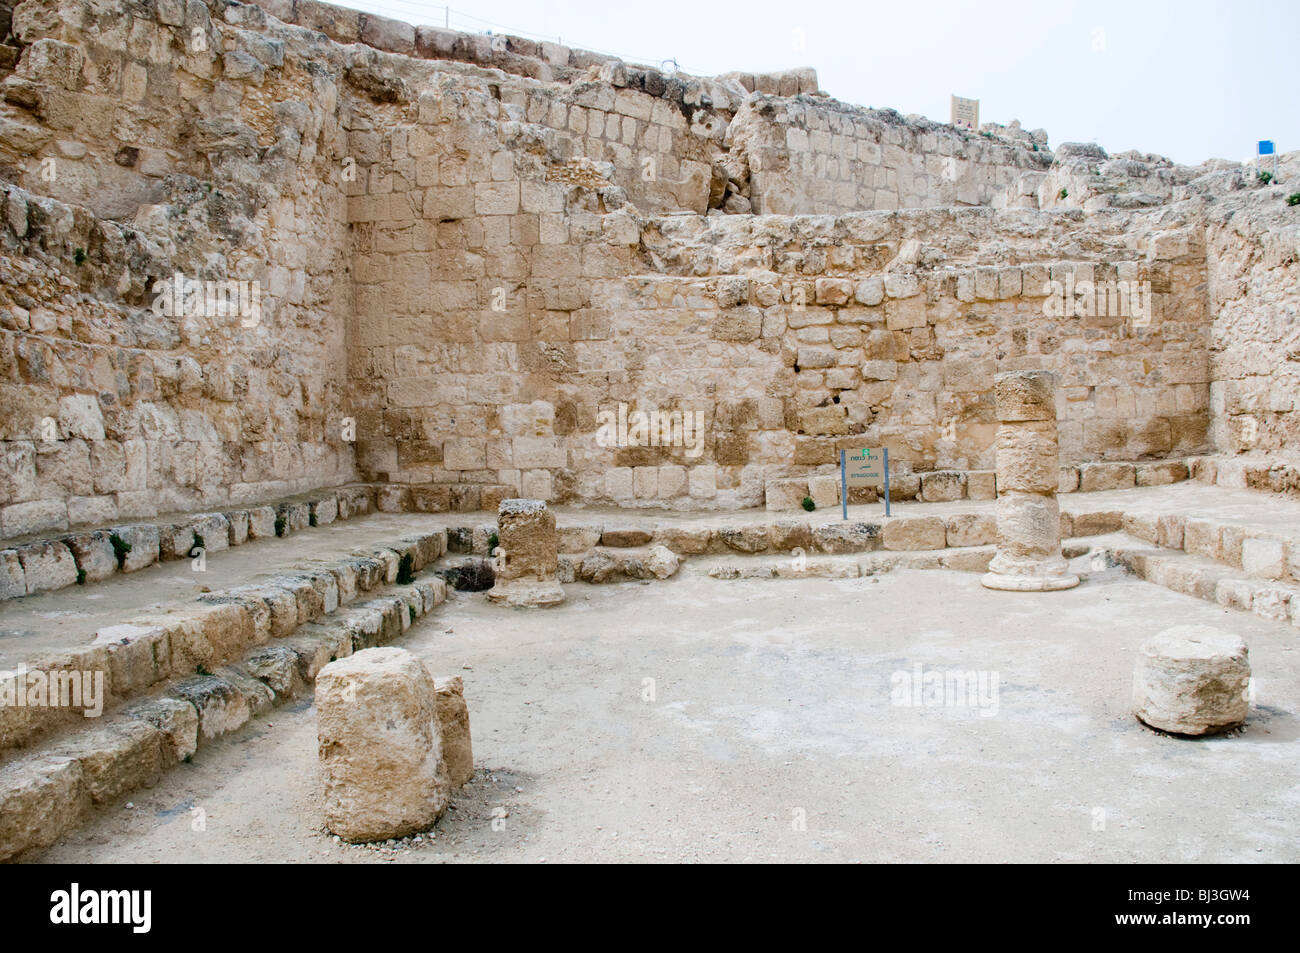 Israel, West Bank, Judaea, Herodion a castle fortress built by King Herod 20 B.C.E. Remains of the castle. The synagogue Stock Photo